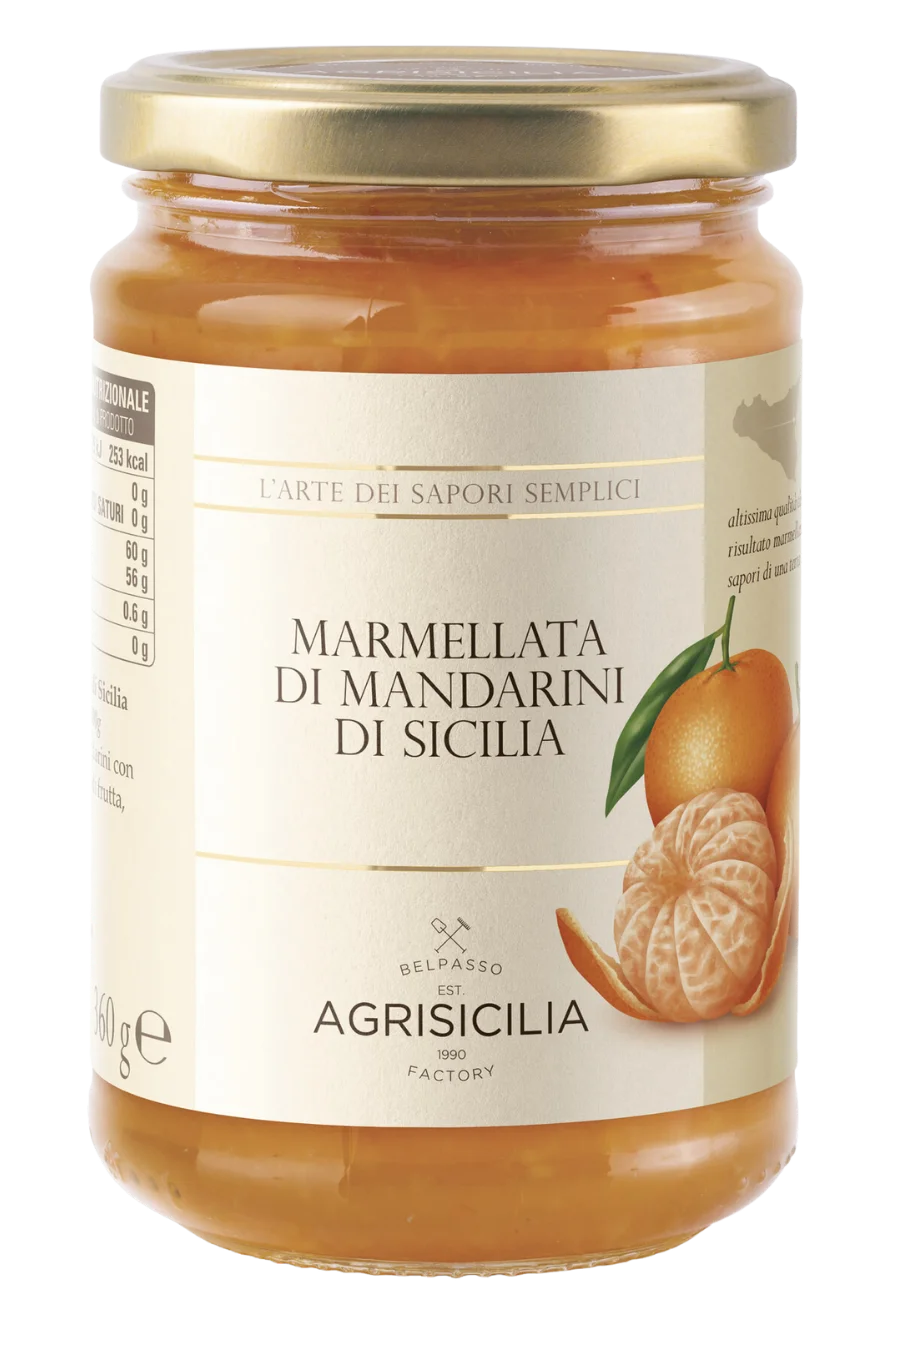 Glass jar with delicious Sicilian mandarin marmalade, made from fresh, high-quality fruit.